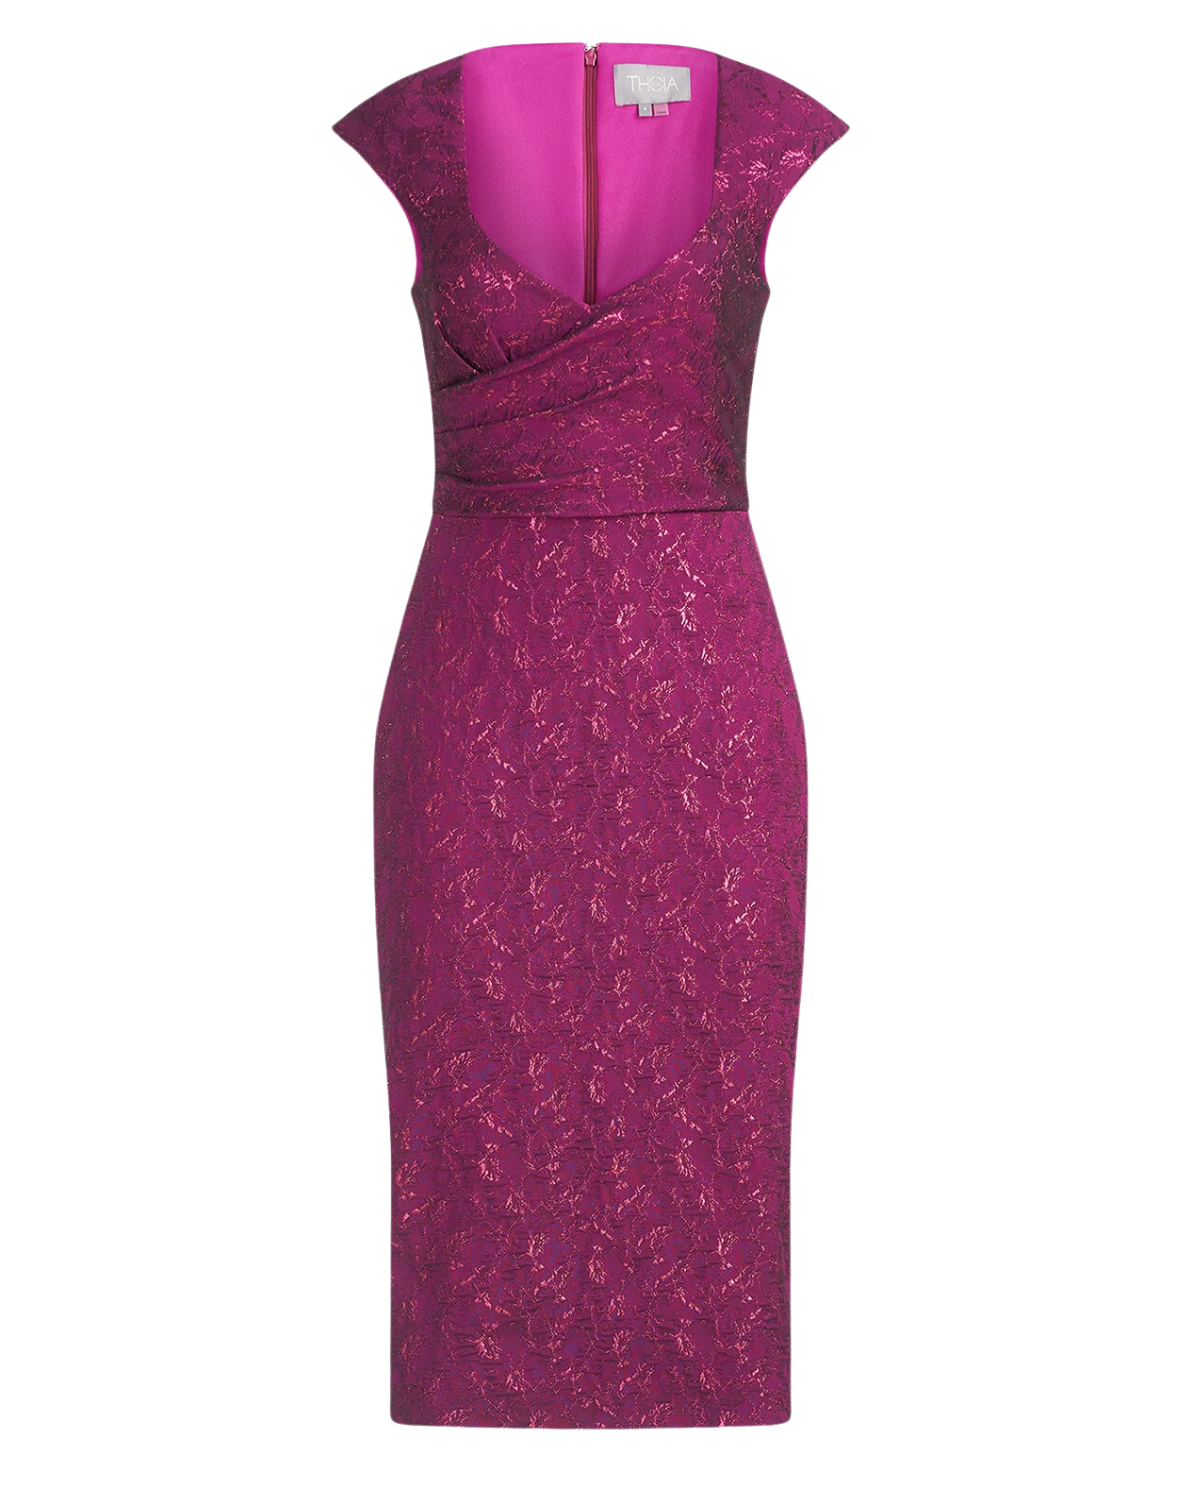 Omnia Fitted Cocktail Dress (Sangria)